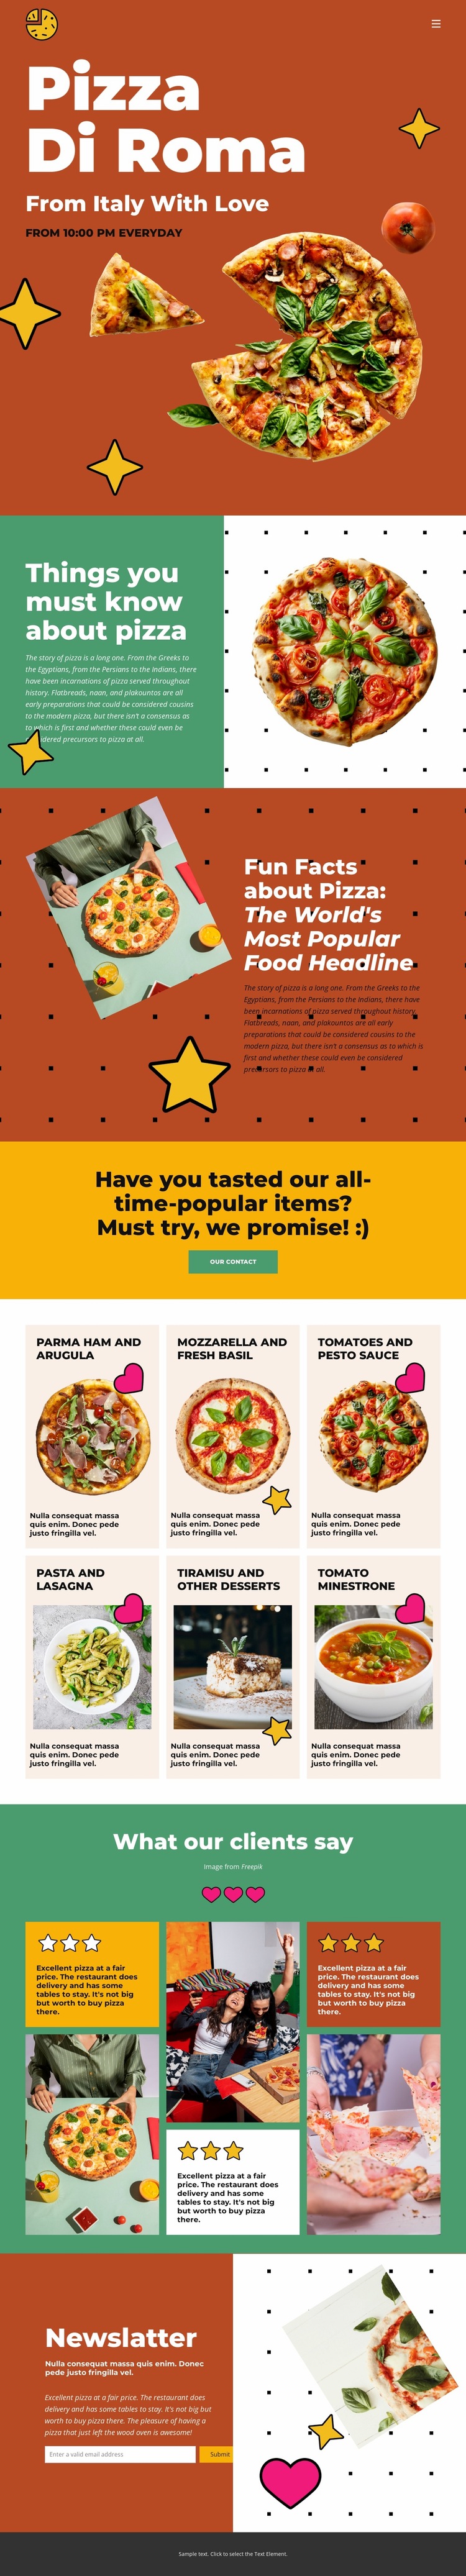 Things you must know about pizza Website Builder Templates